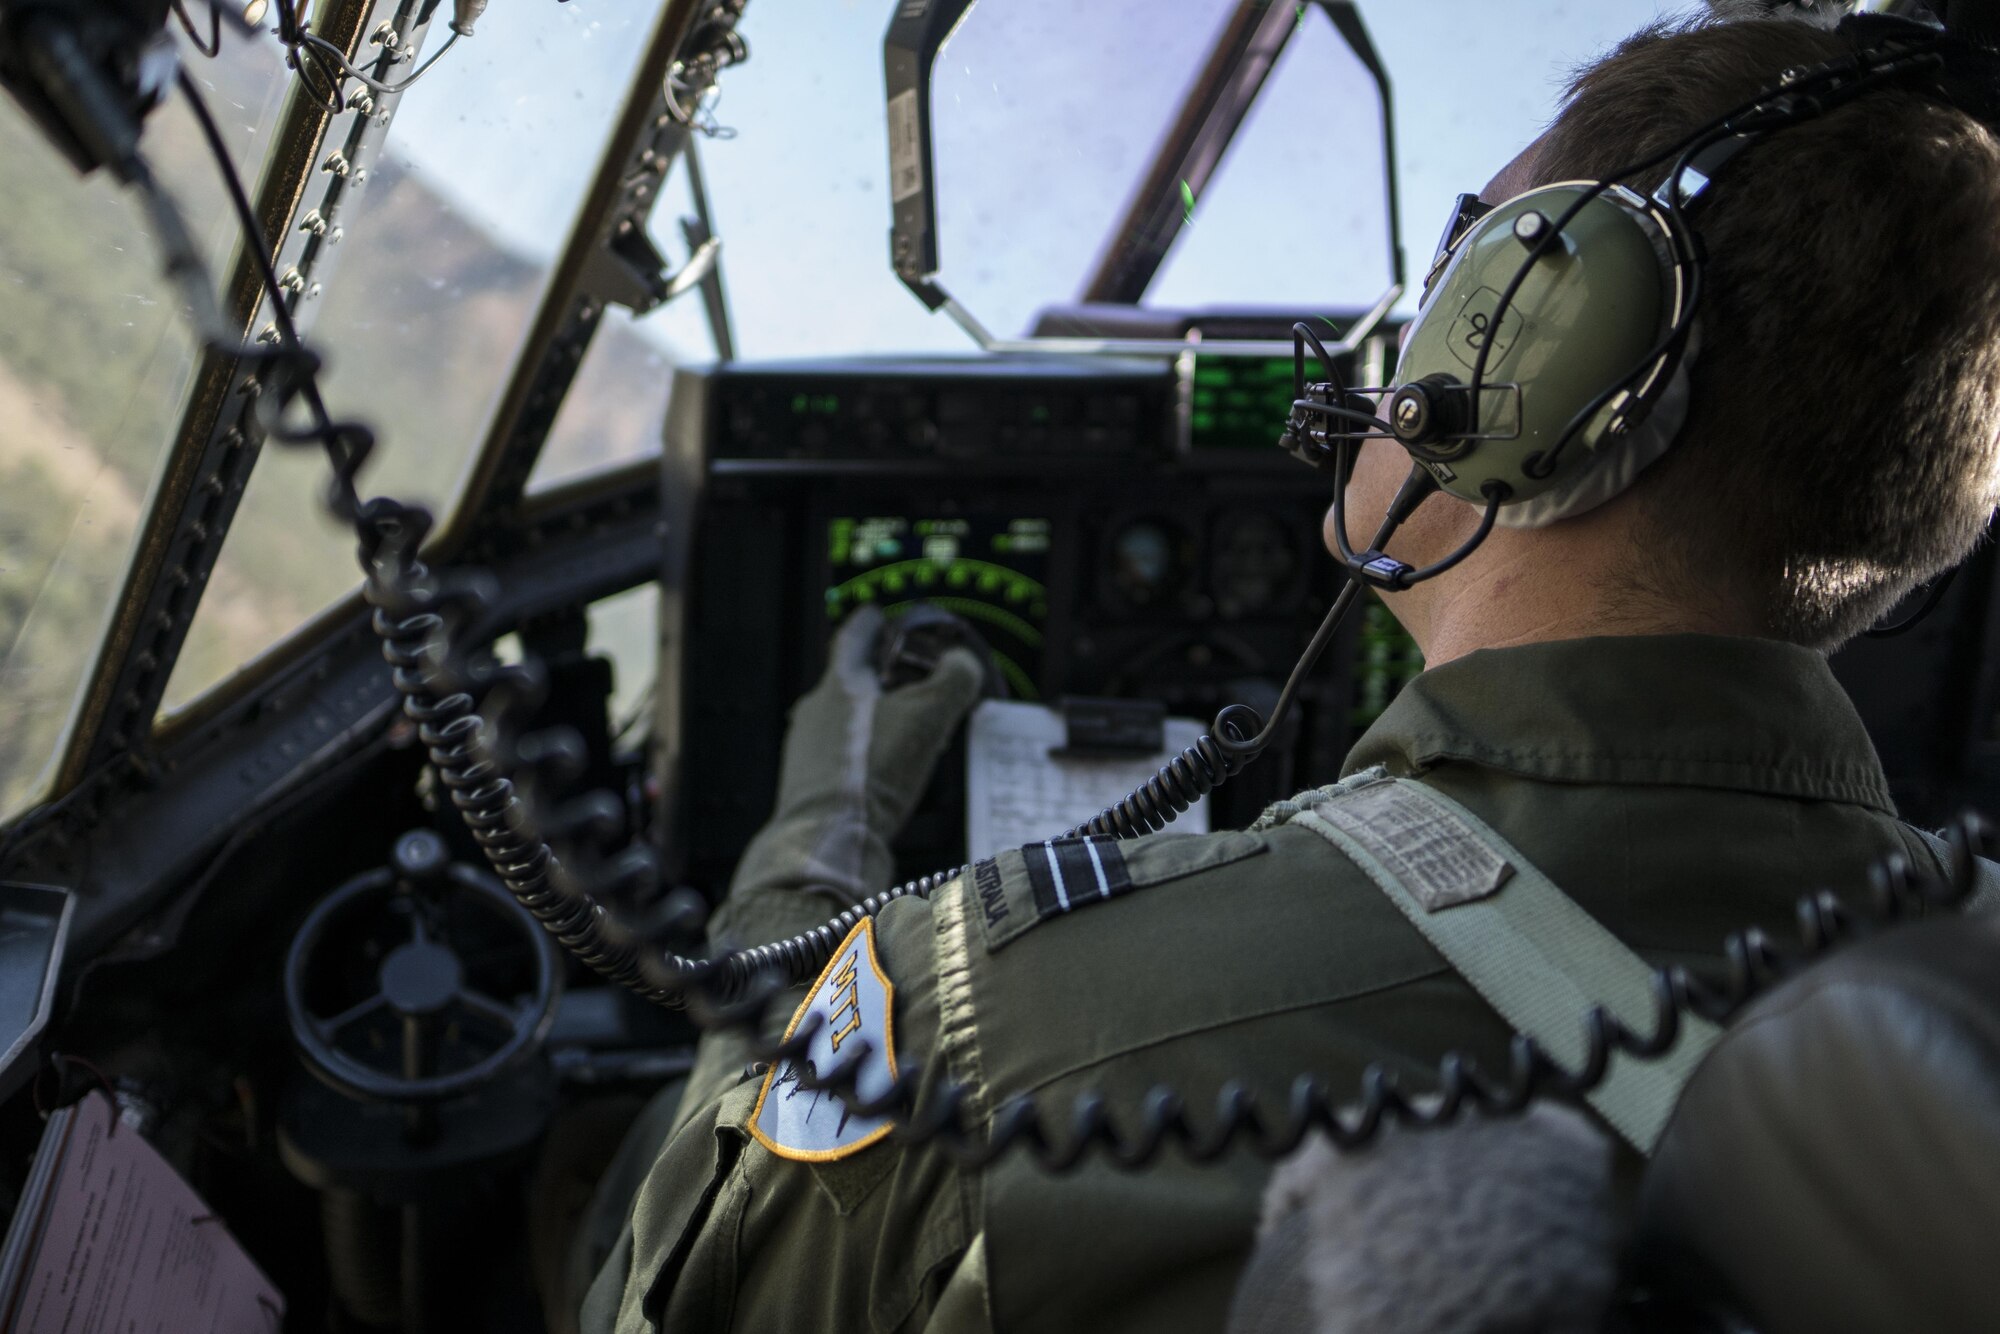 A No. 37 Squadron Royal Australian Air Force pilot looks out the window of a RAAF C-130J Hercules during a dissimilar formation flight with a U.S. Air Force 17th Special Operations Squadron MC-130J Commando II July 12, 2017 over Queensland, Australia. Talisman Saber 2017 provided the opportunity at further developing interoperability with counterparts from the RAAF through daily airborne operations to include low-level formation work, forward air refueling point, and personnel and cargo airdrops. (U.S. Air Force photo by Capt. Jessica Tait)